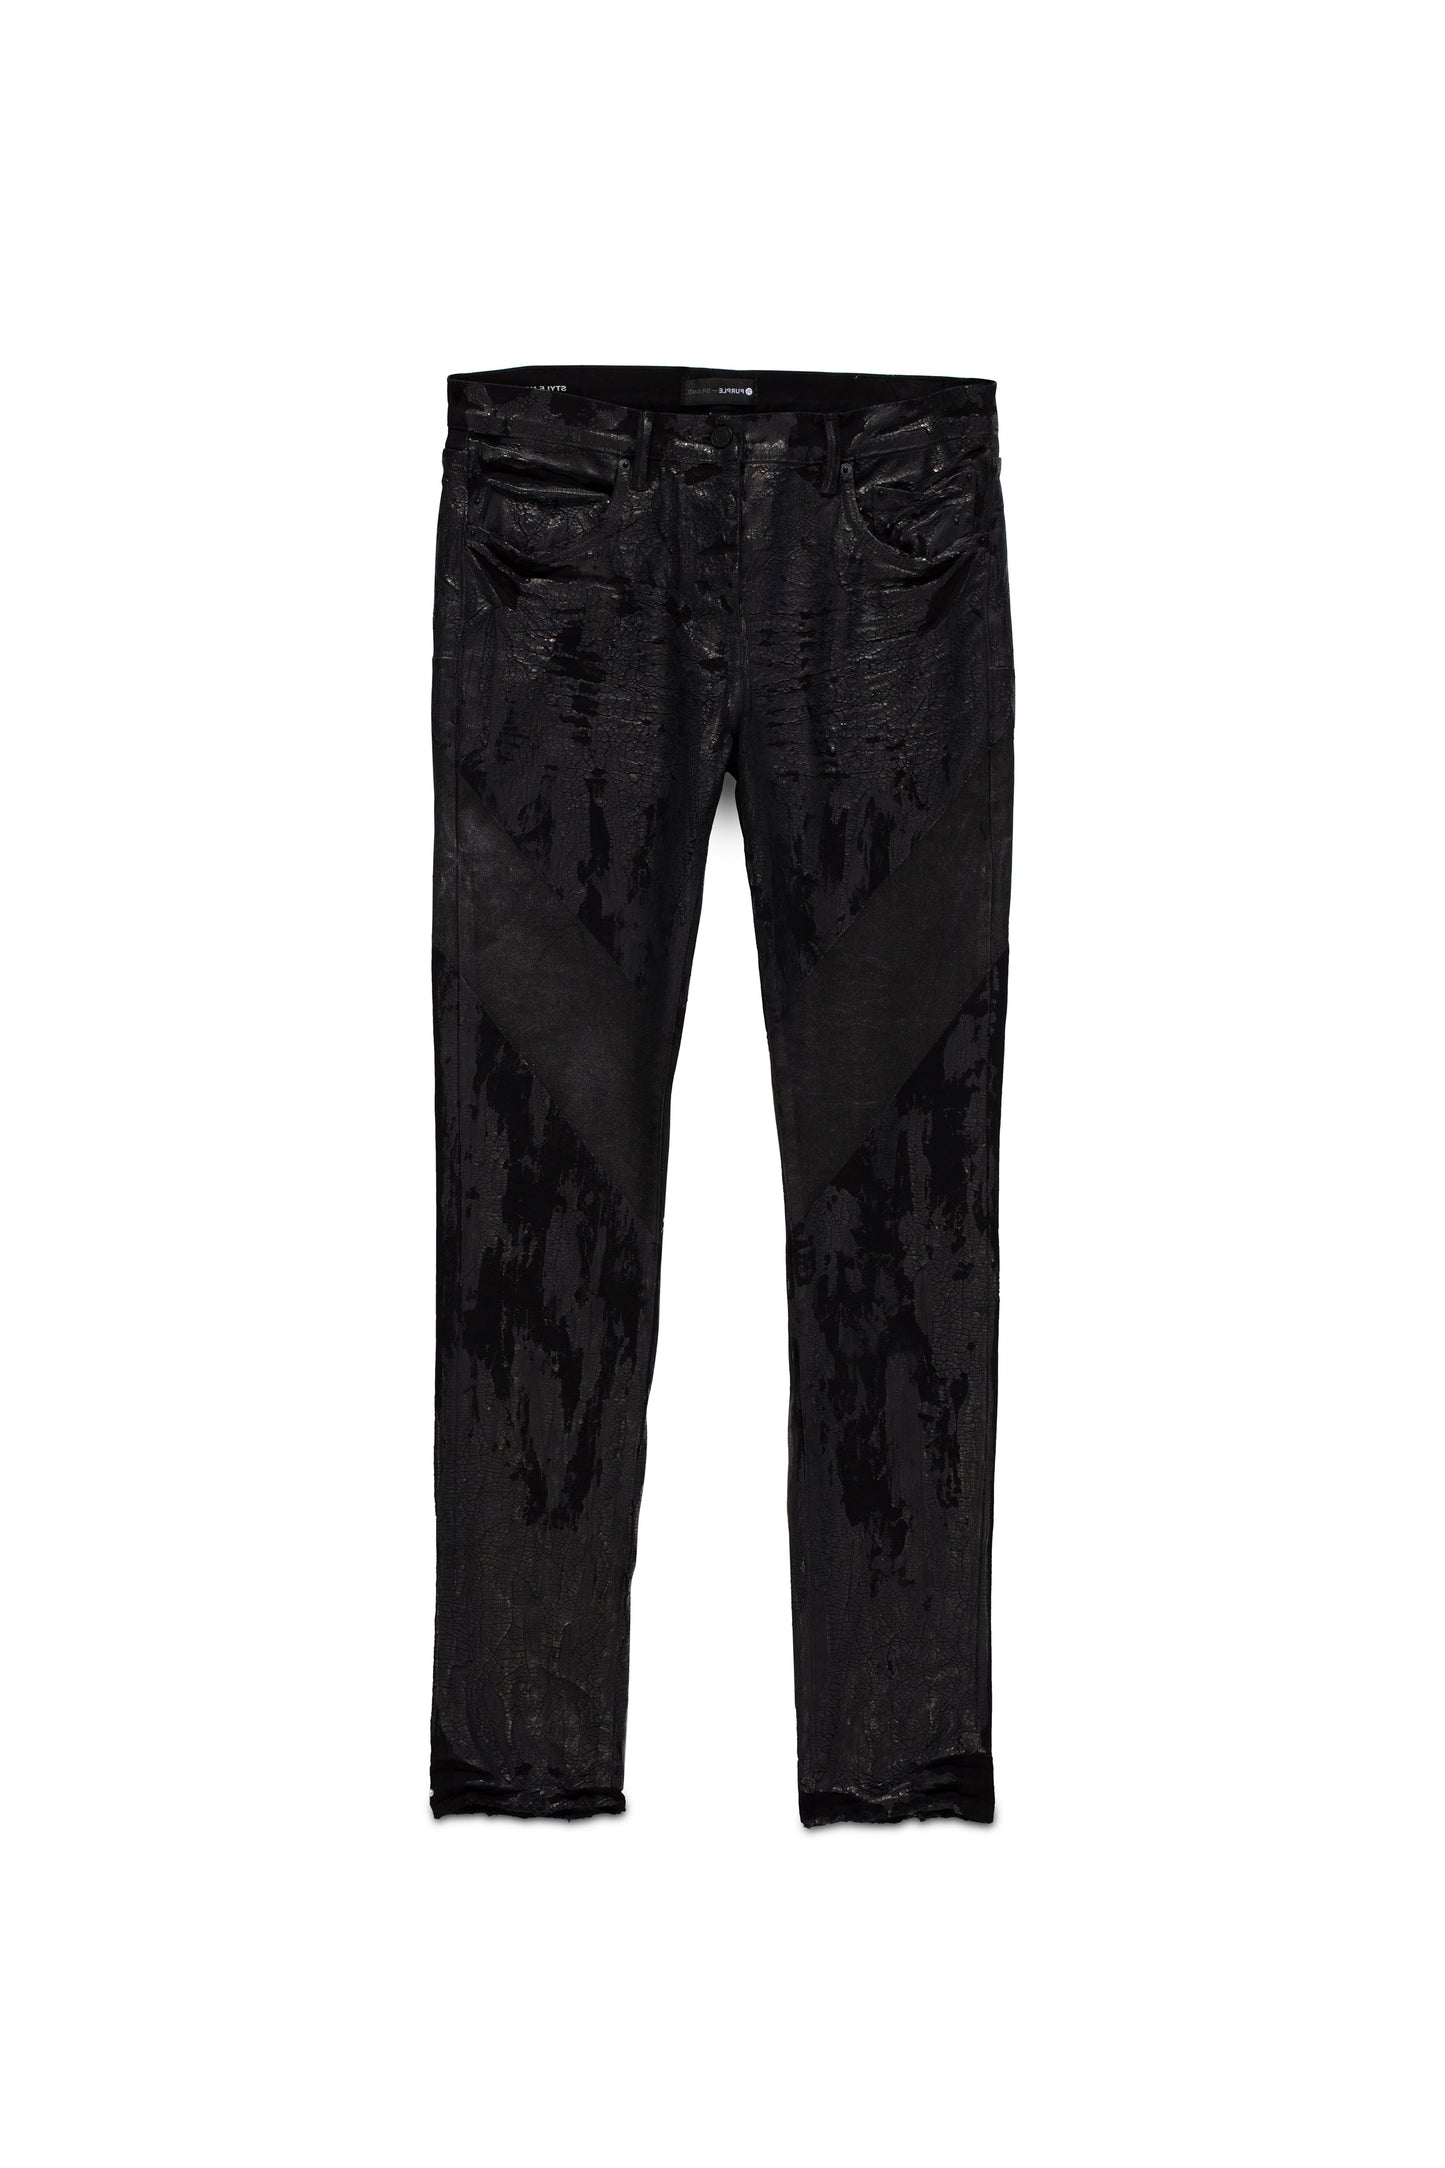 P001 LOW RISE SKINNY JEAN - Black Crackle Paint With Foil